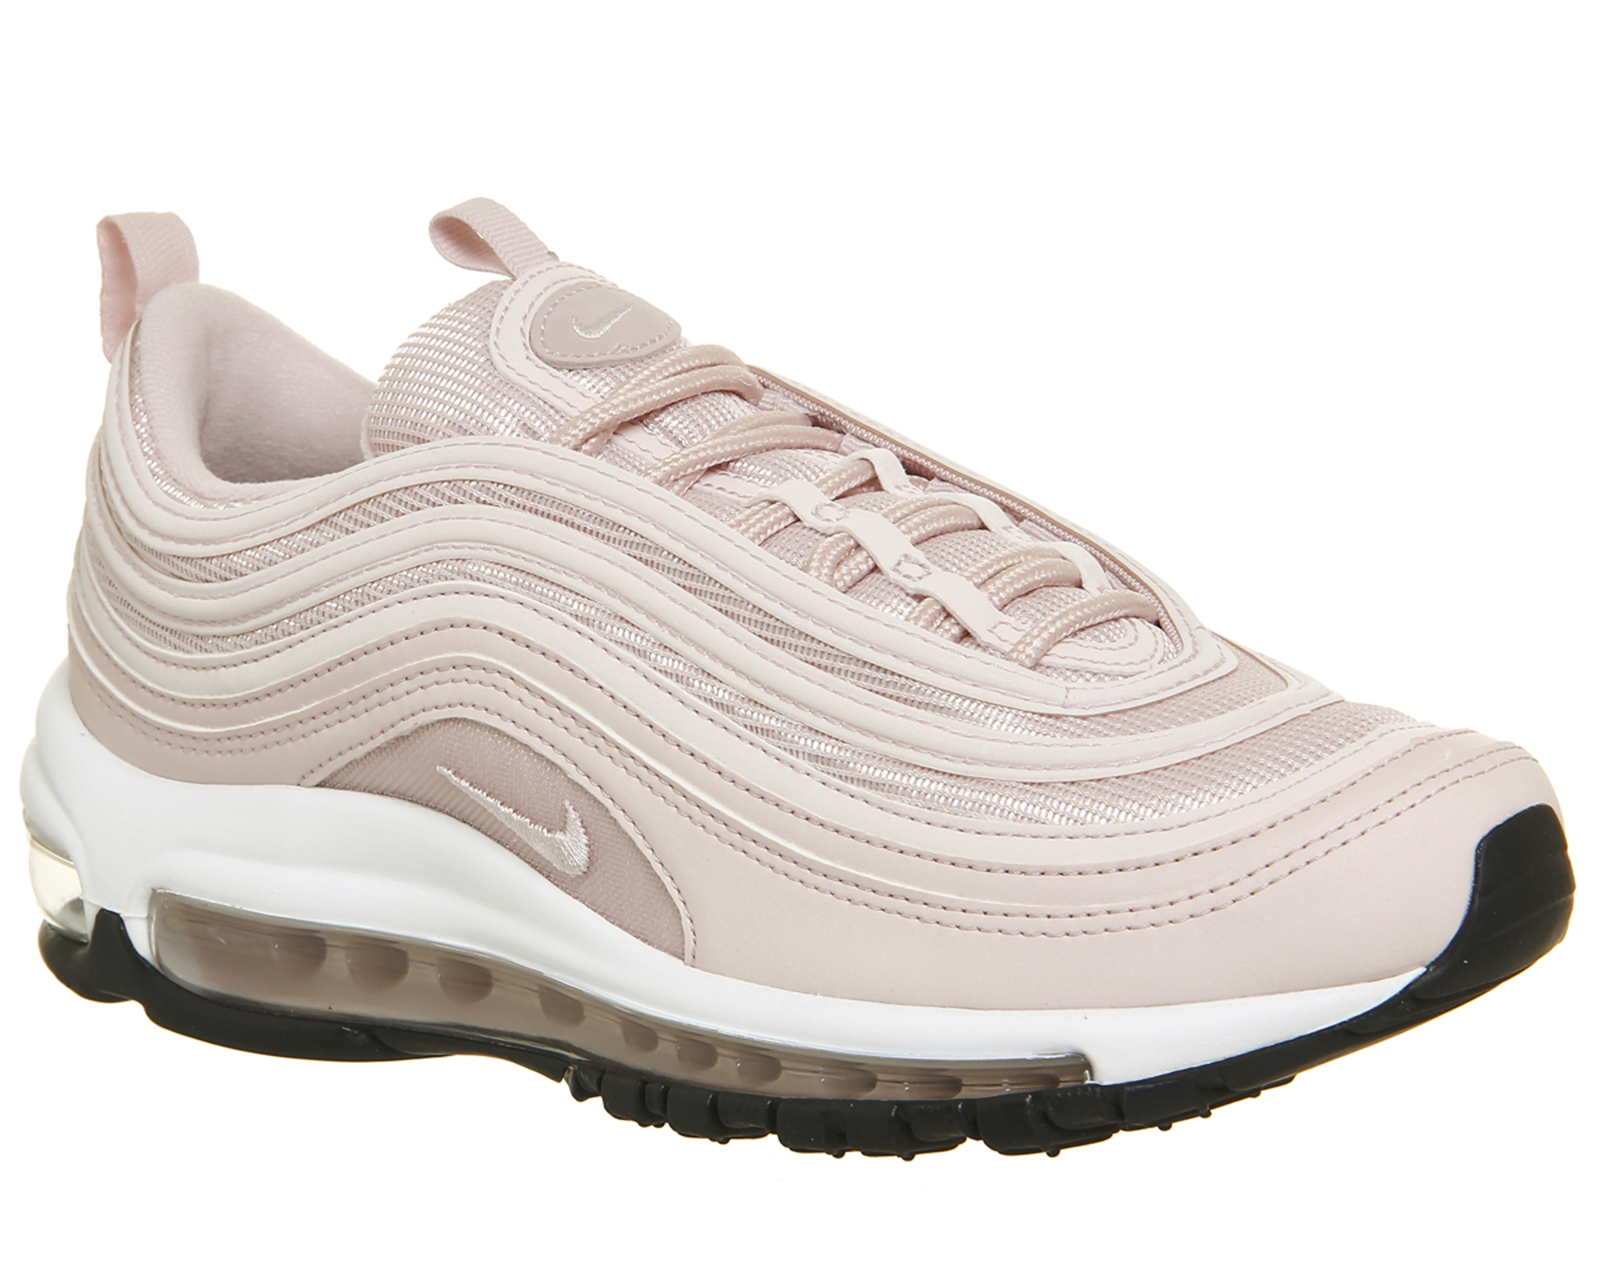 Nike Air Max 97 Trainers Barely Rose 